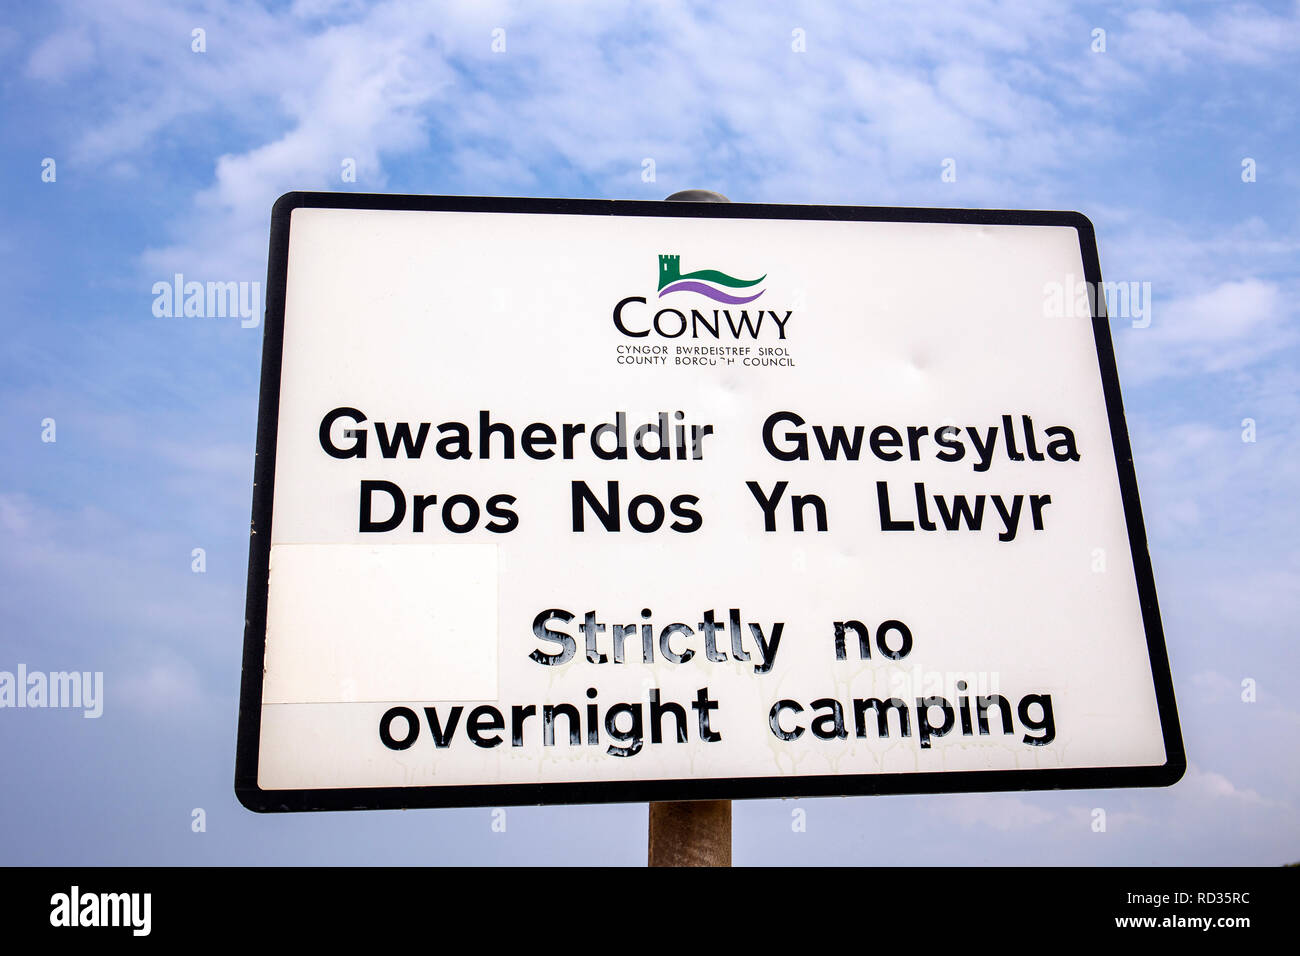 Strictly no overnight camping sign in English and Wales language as told by Conwy County Borough Council, Wales UK Stock Photo